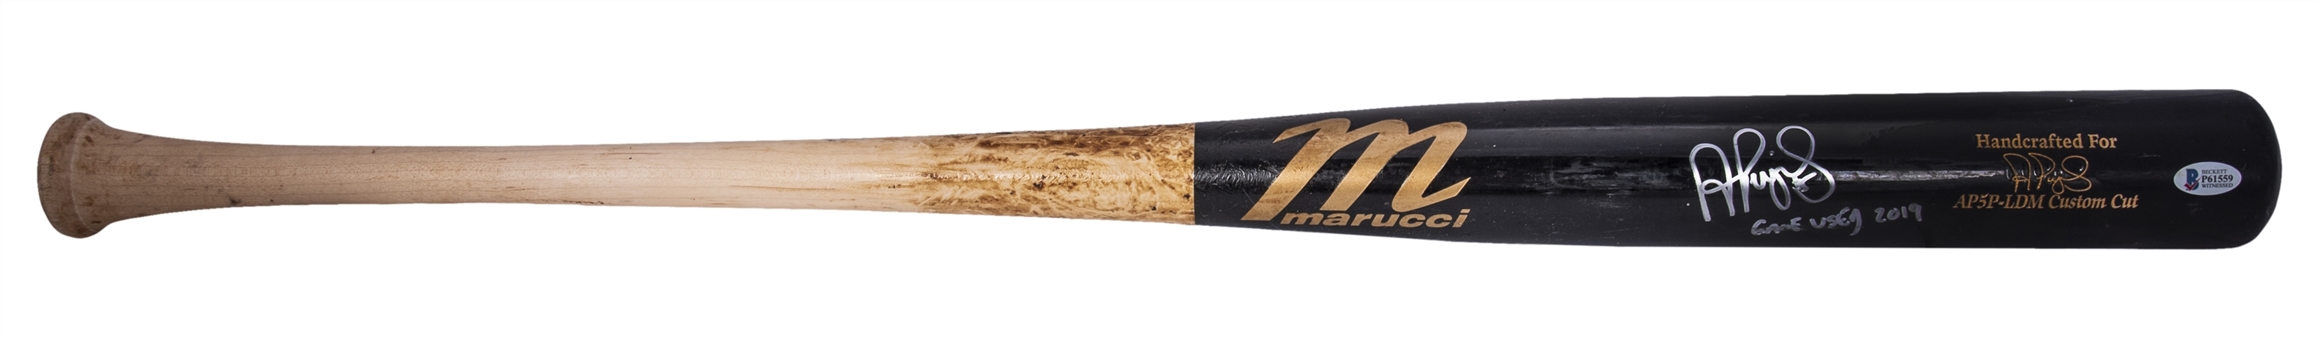 2019 Albert Pujols Game Used & Signed/Inscribed Marucci AP5P-LDM Model Bat Used on 9/1/19 Used For RBI Ground-Rule Double (MLB Authenticated & Beckett)